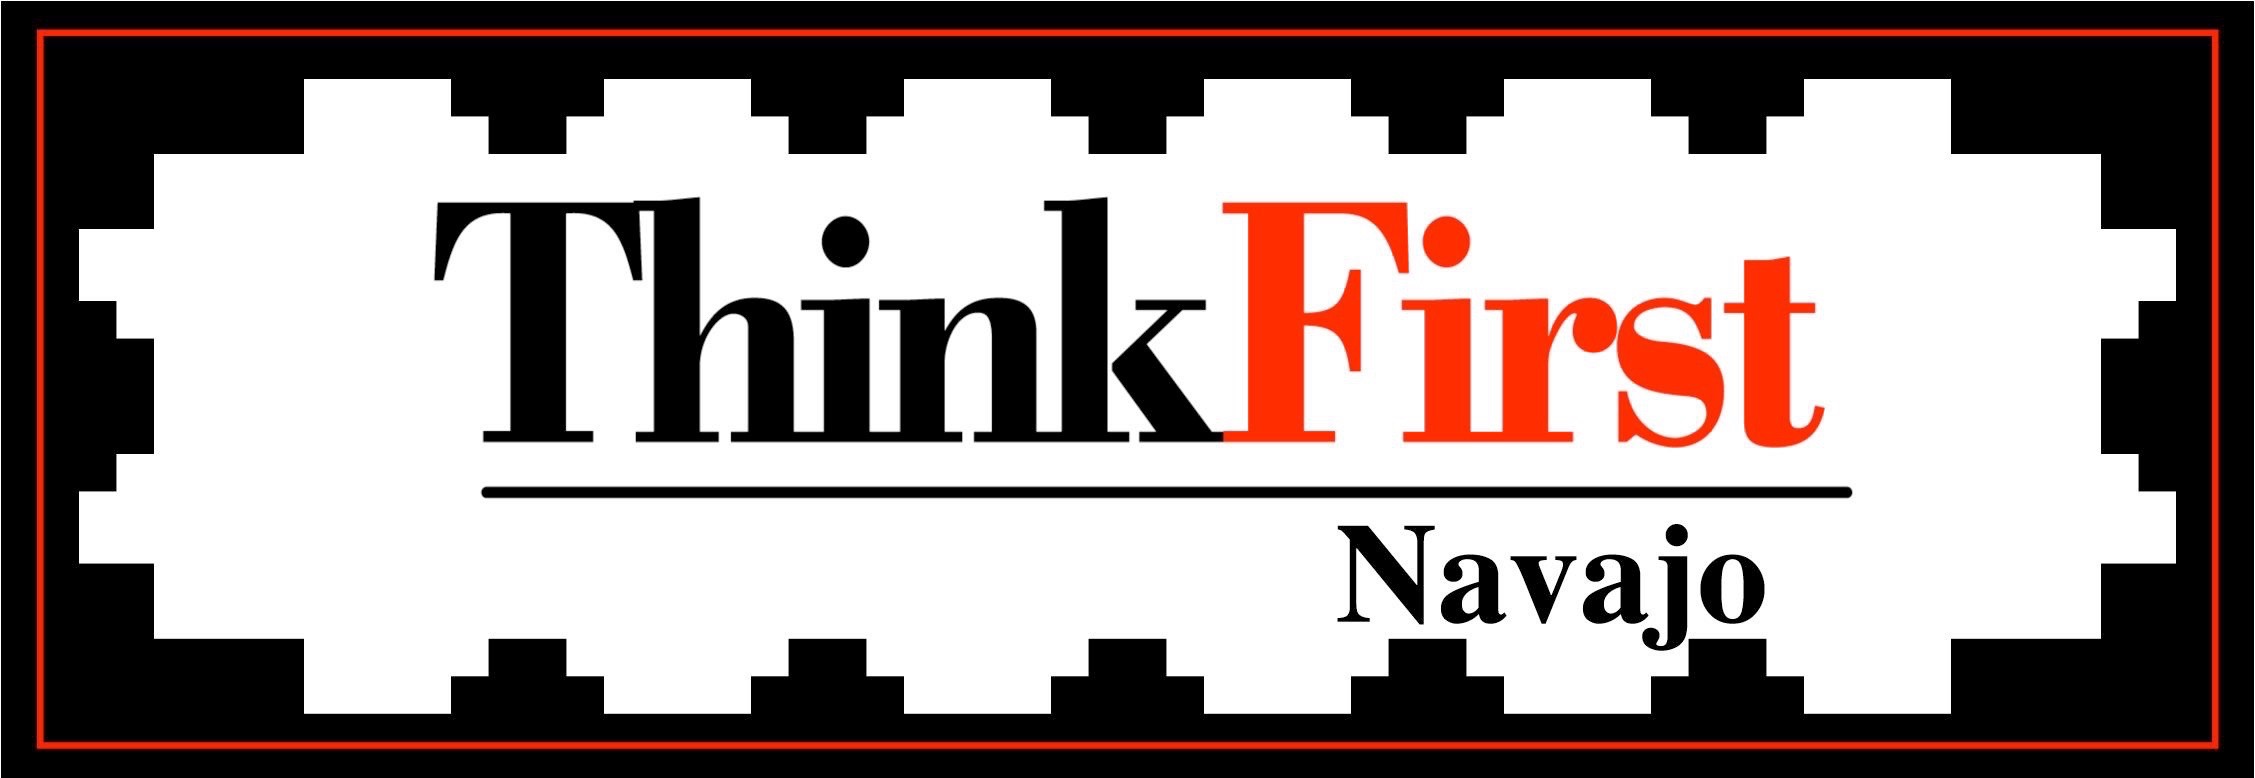 ThinkFirst Navajo Is keeping Navajo kids safe on the road